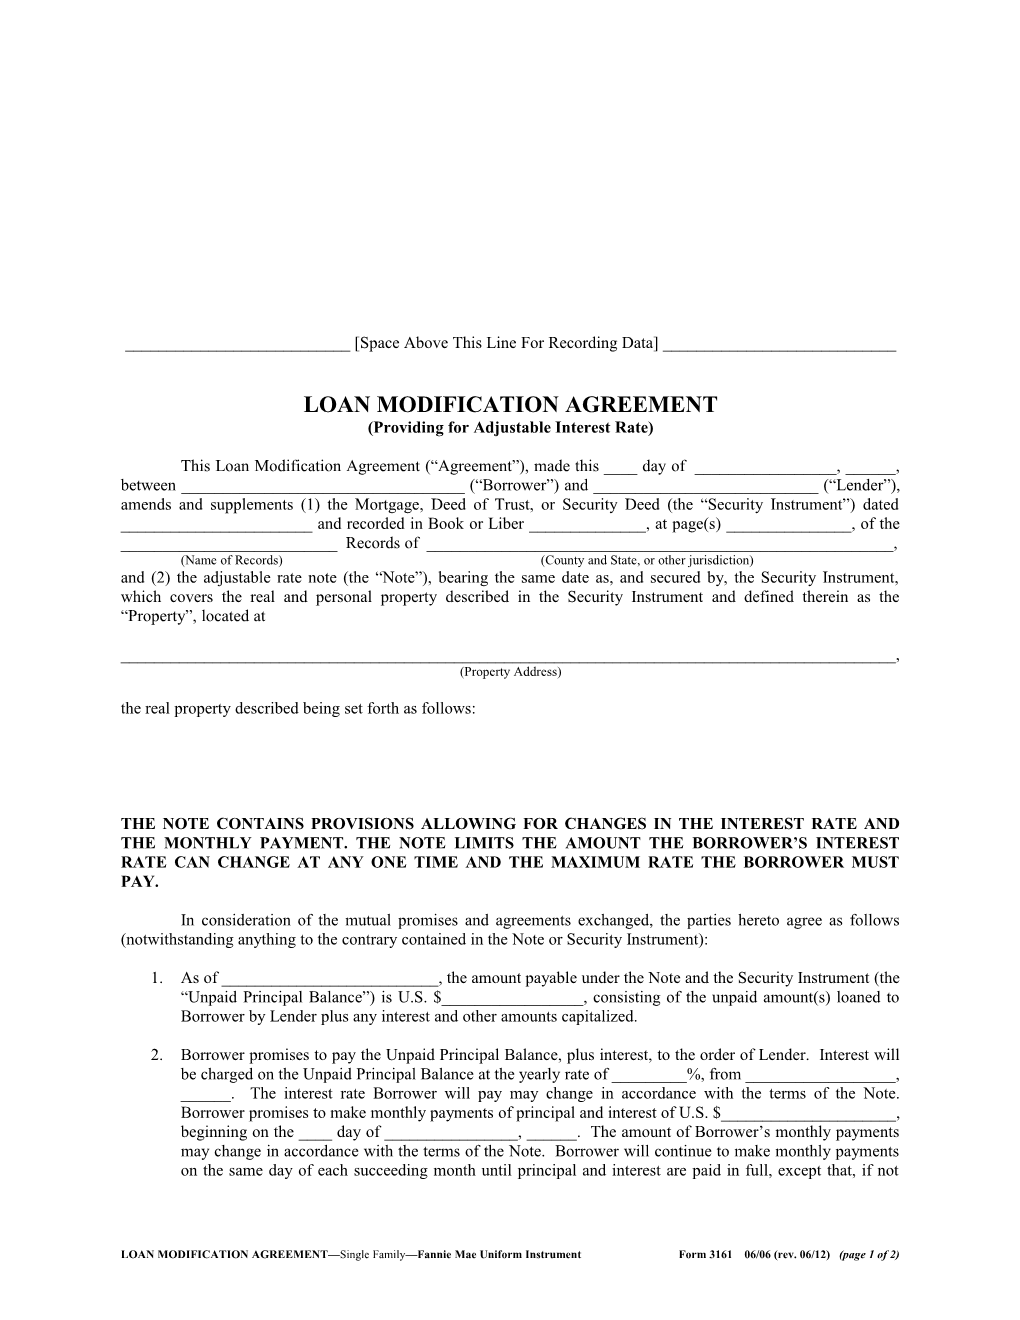 Loan Modification Agreement (Form 3161): Word